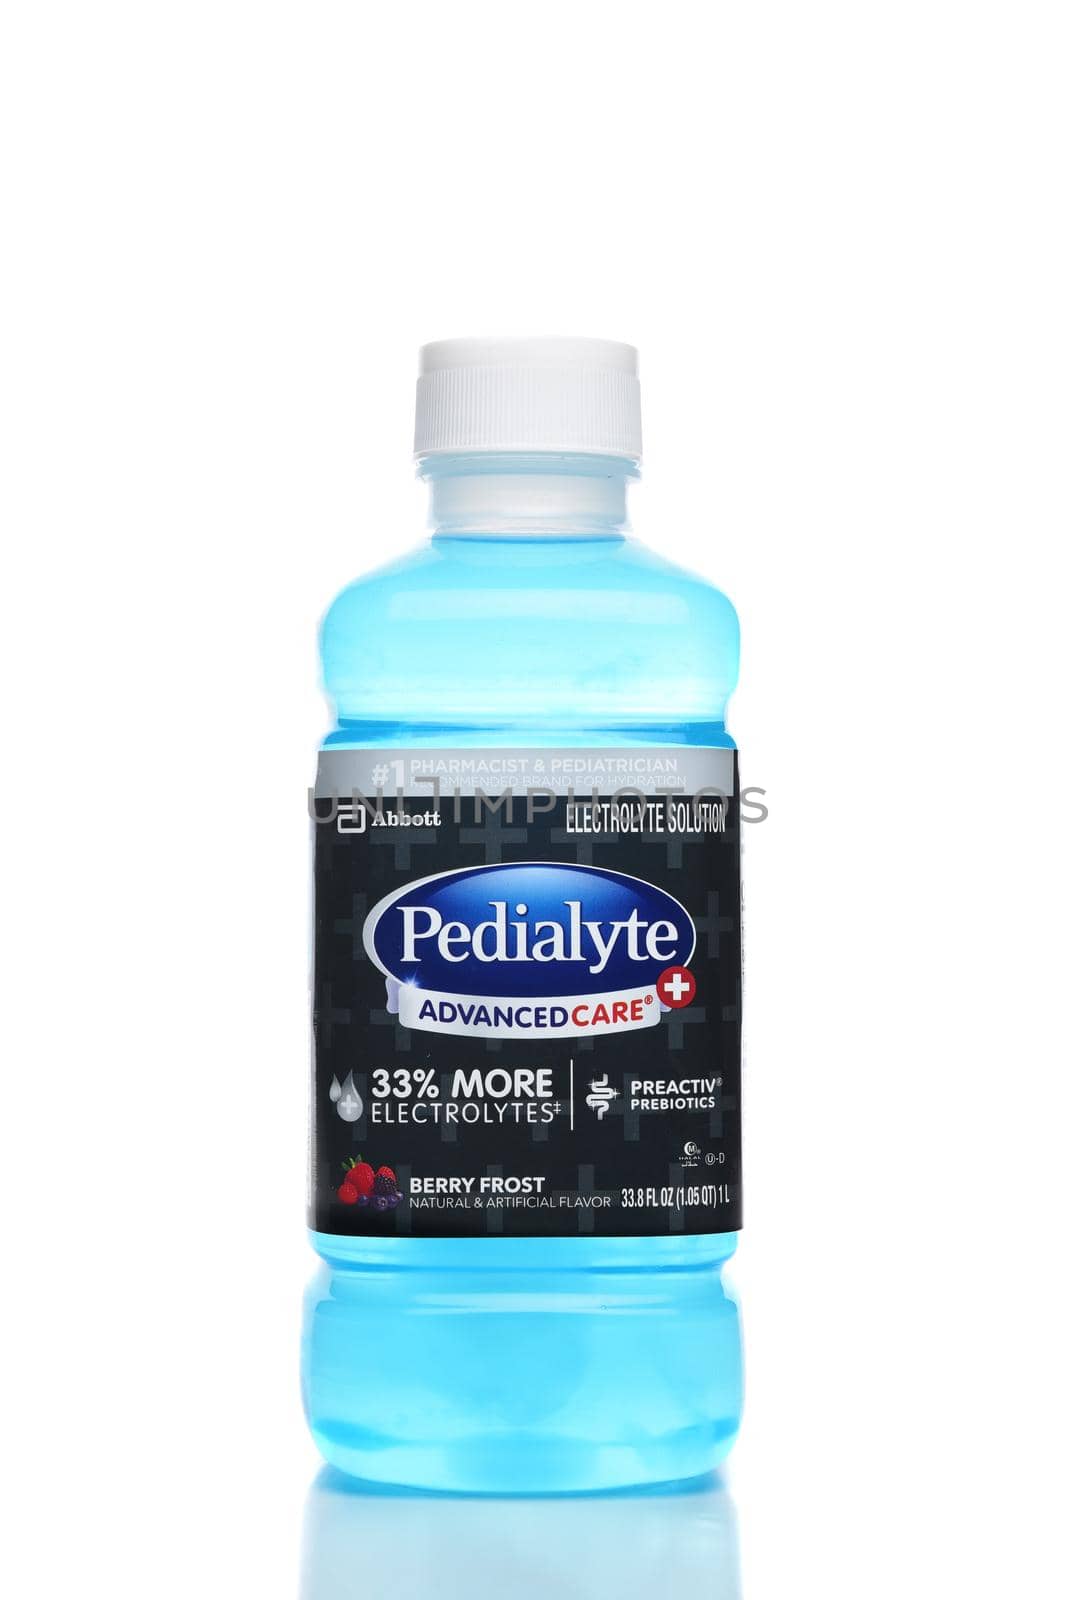 IRVINE, CALIFORNIA - 21 DEC 2020: A bottle of Pedialyte Advanced Care Electrolyte Solution, Berry Frost Flavor.